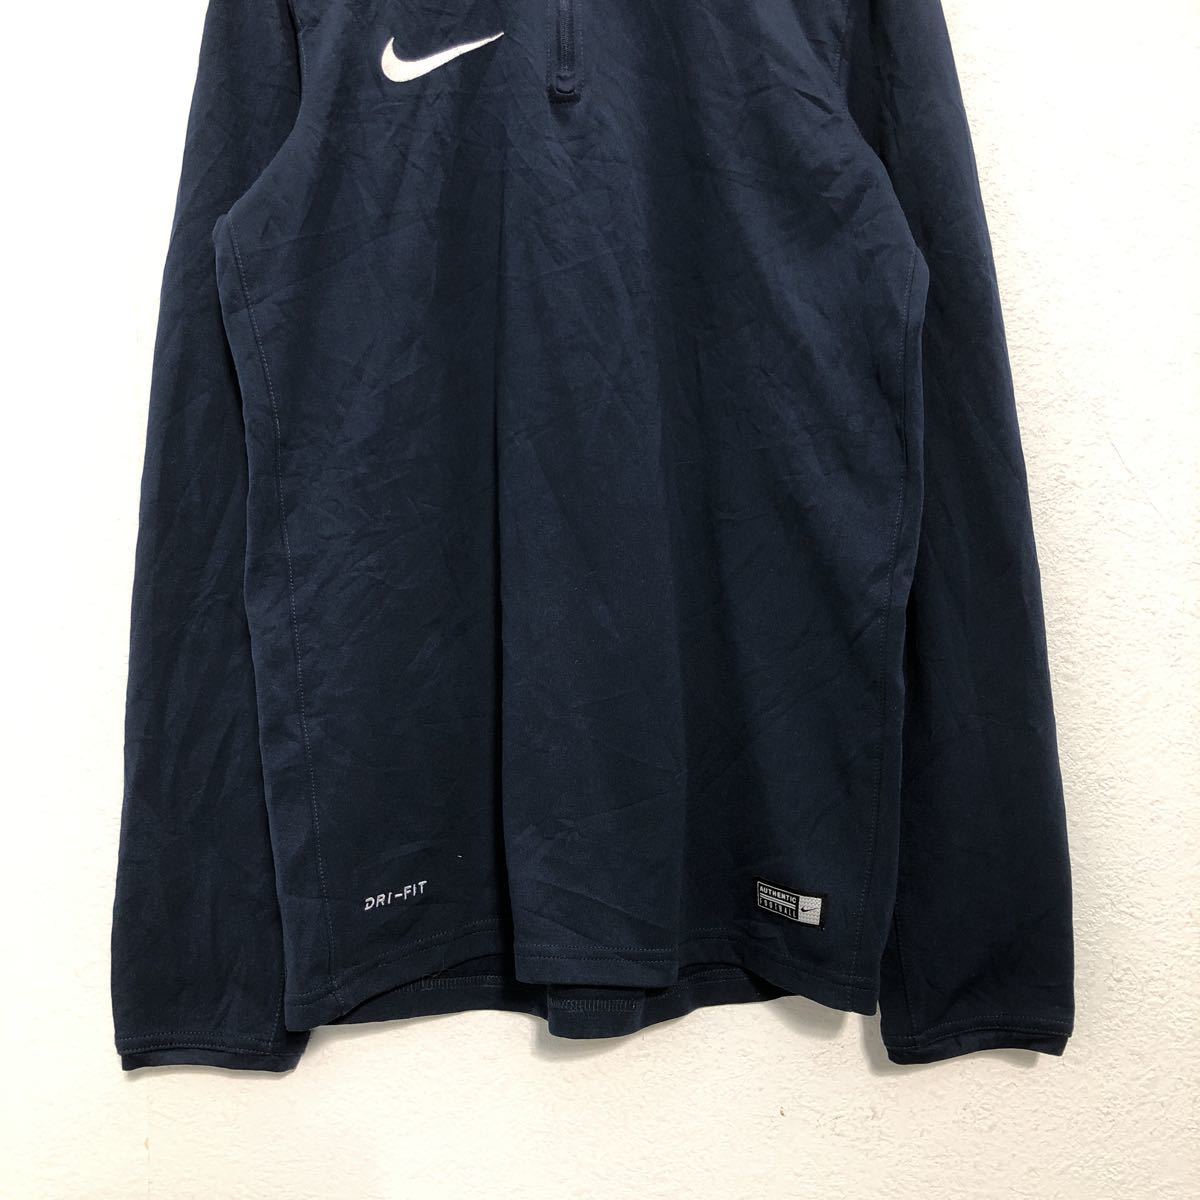 NIKE DRI-FIT half Zip jersey S size Nike sport navy blue navy old clothes . America buying up a504-6373